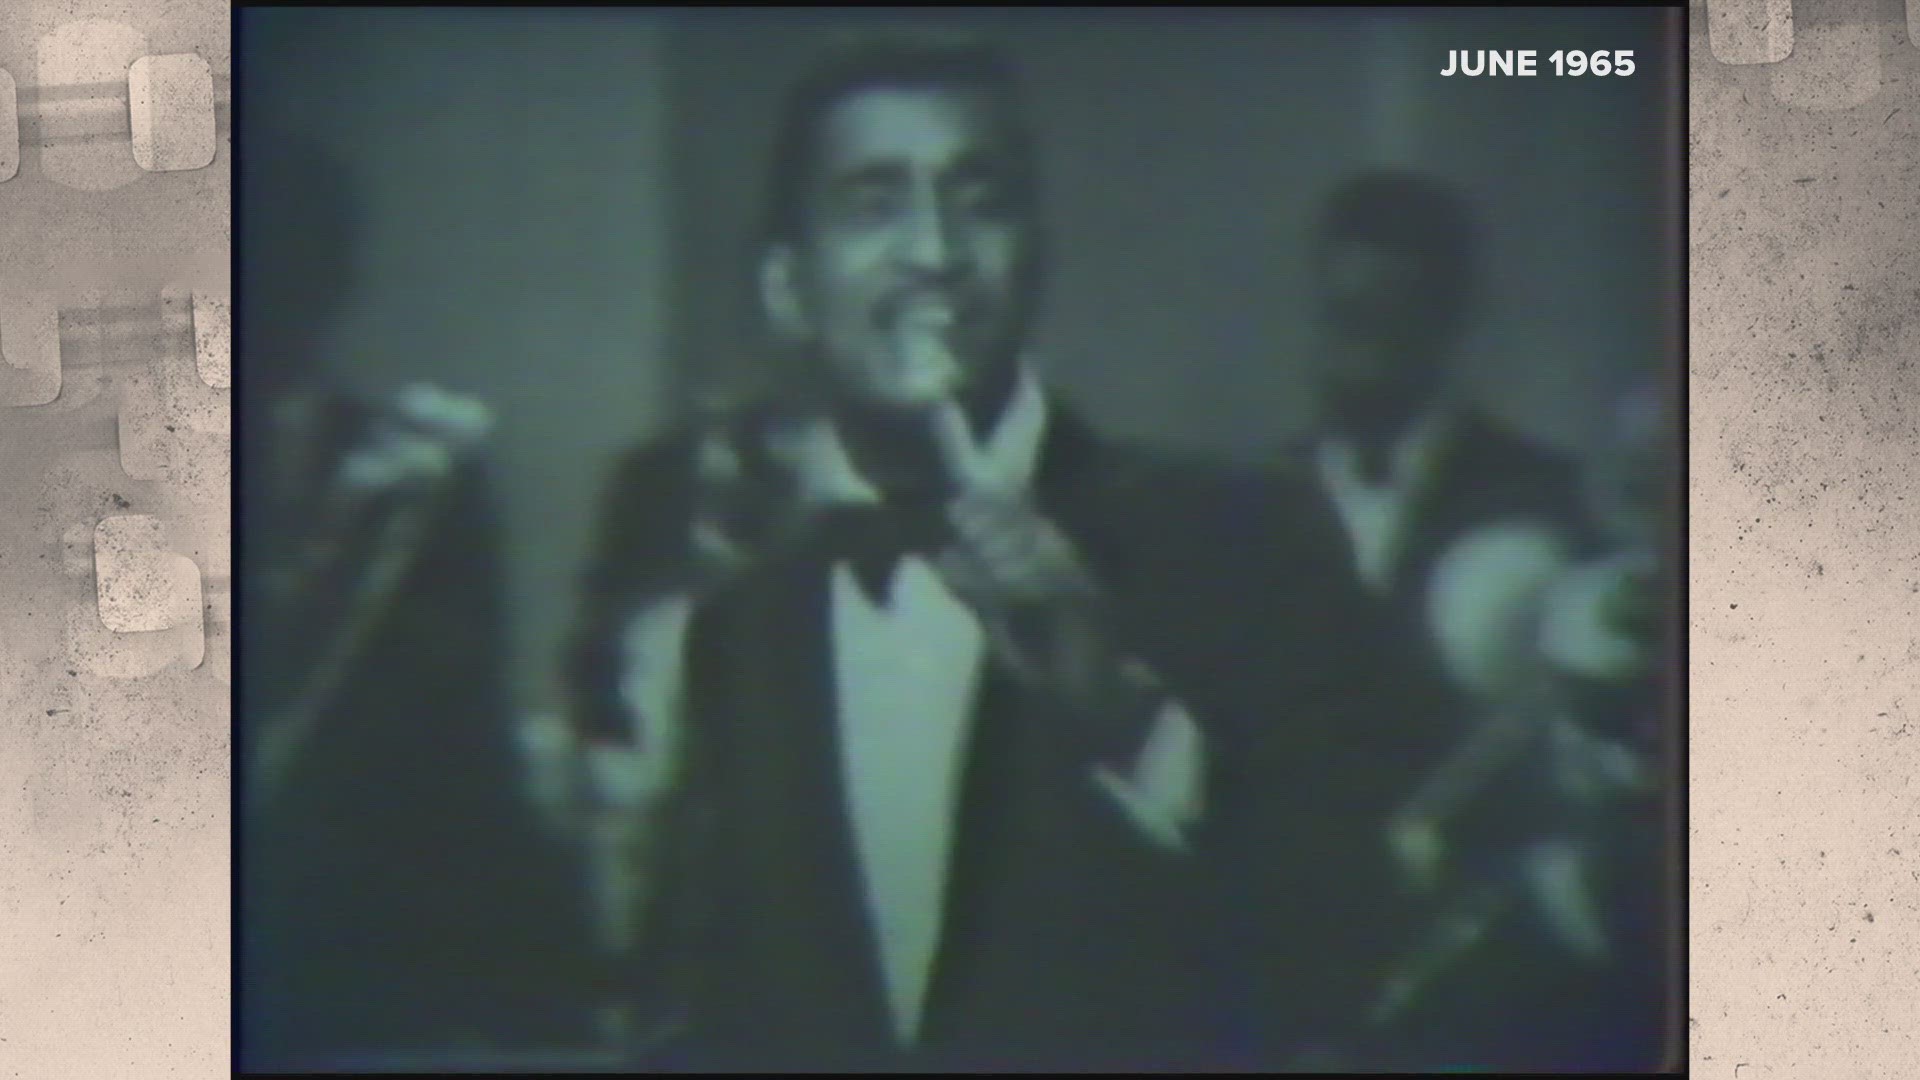 Several A-list entertainers from the 50s and 60s known as the Rat Pack made an appearance, including Dean Martin. The show was called the "Frank Sinatra Spectacular.